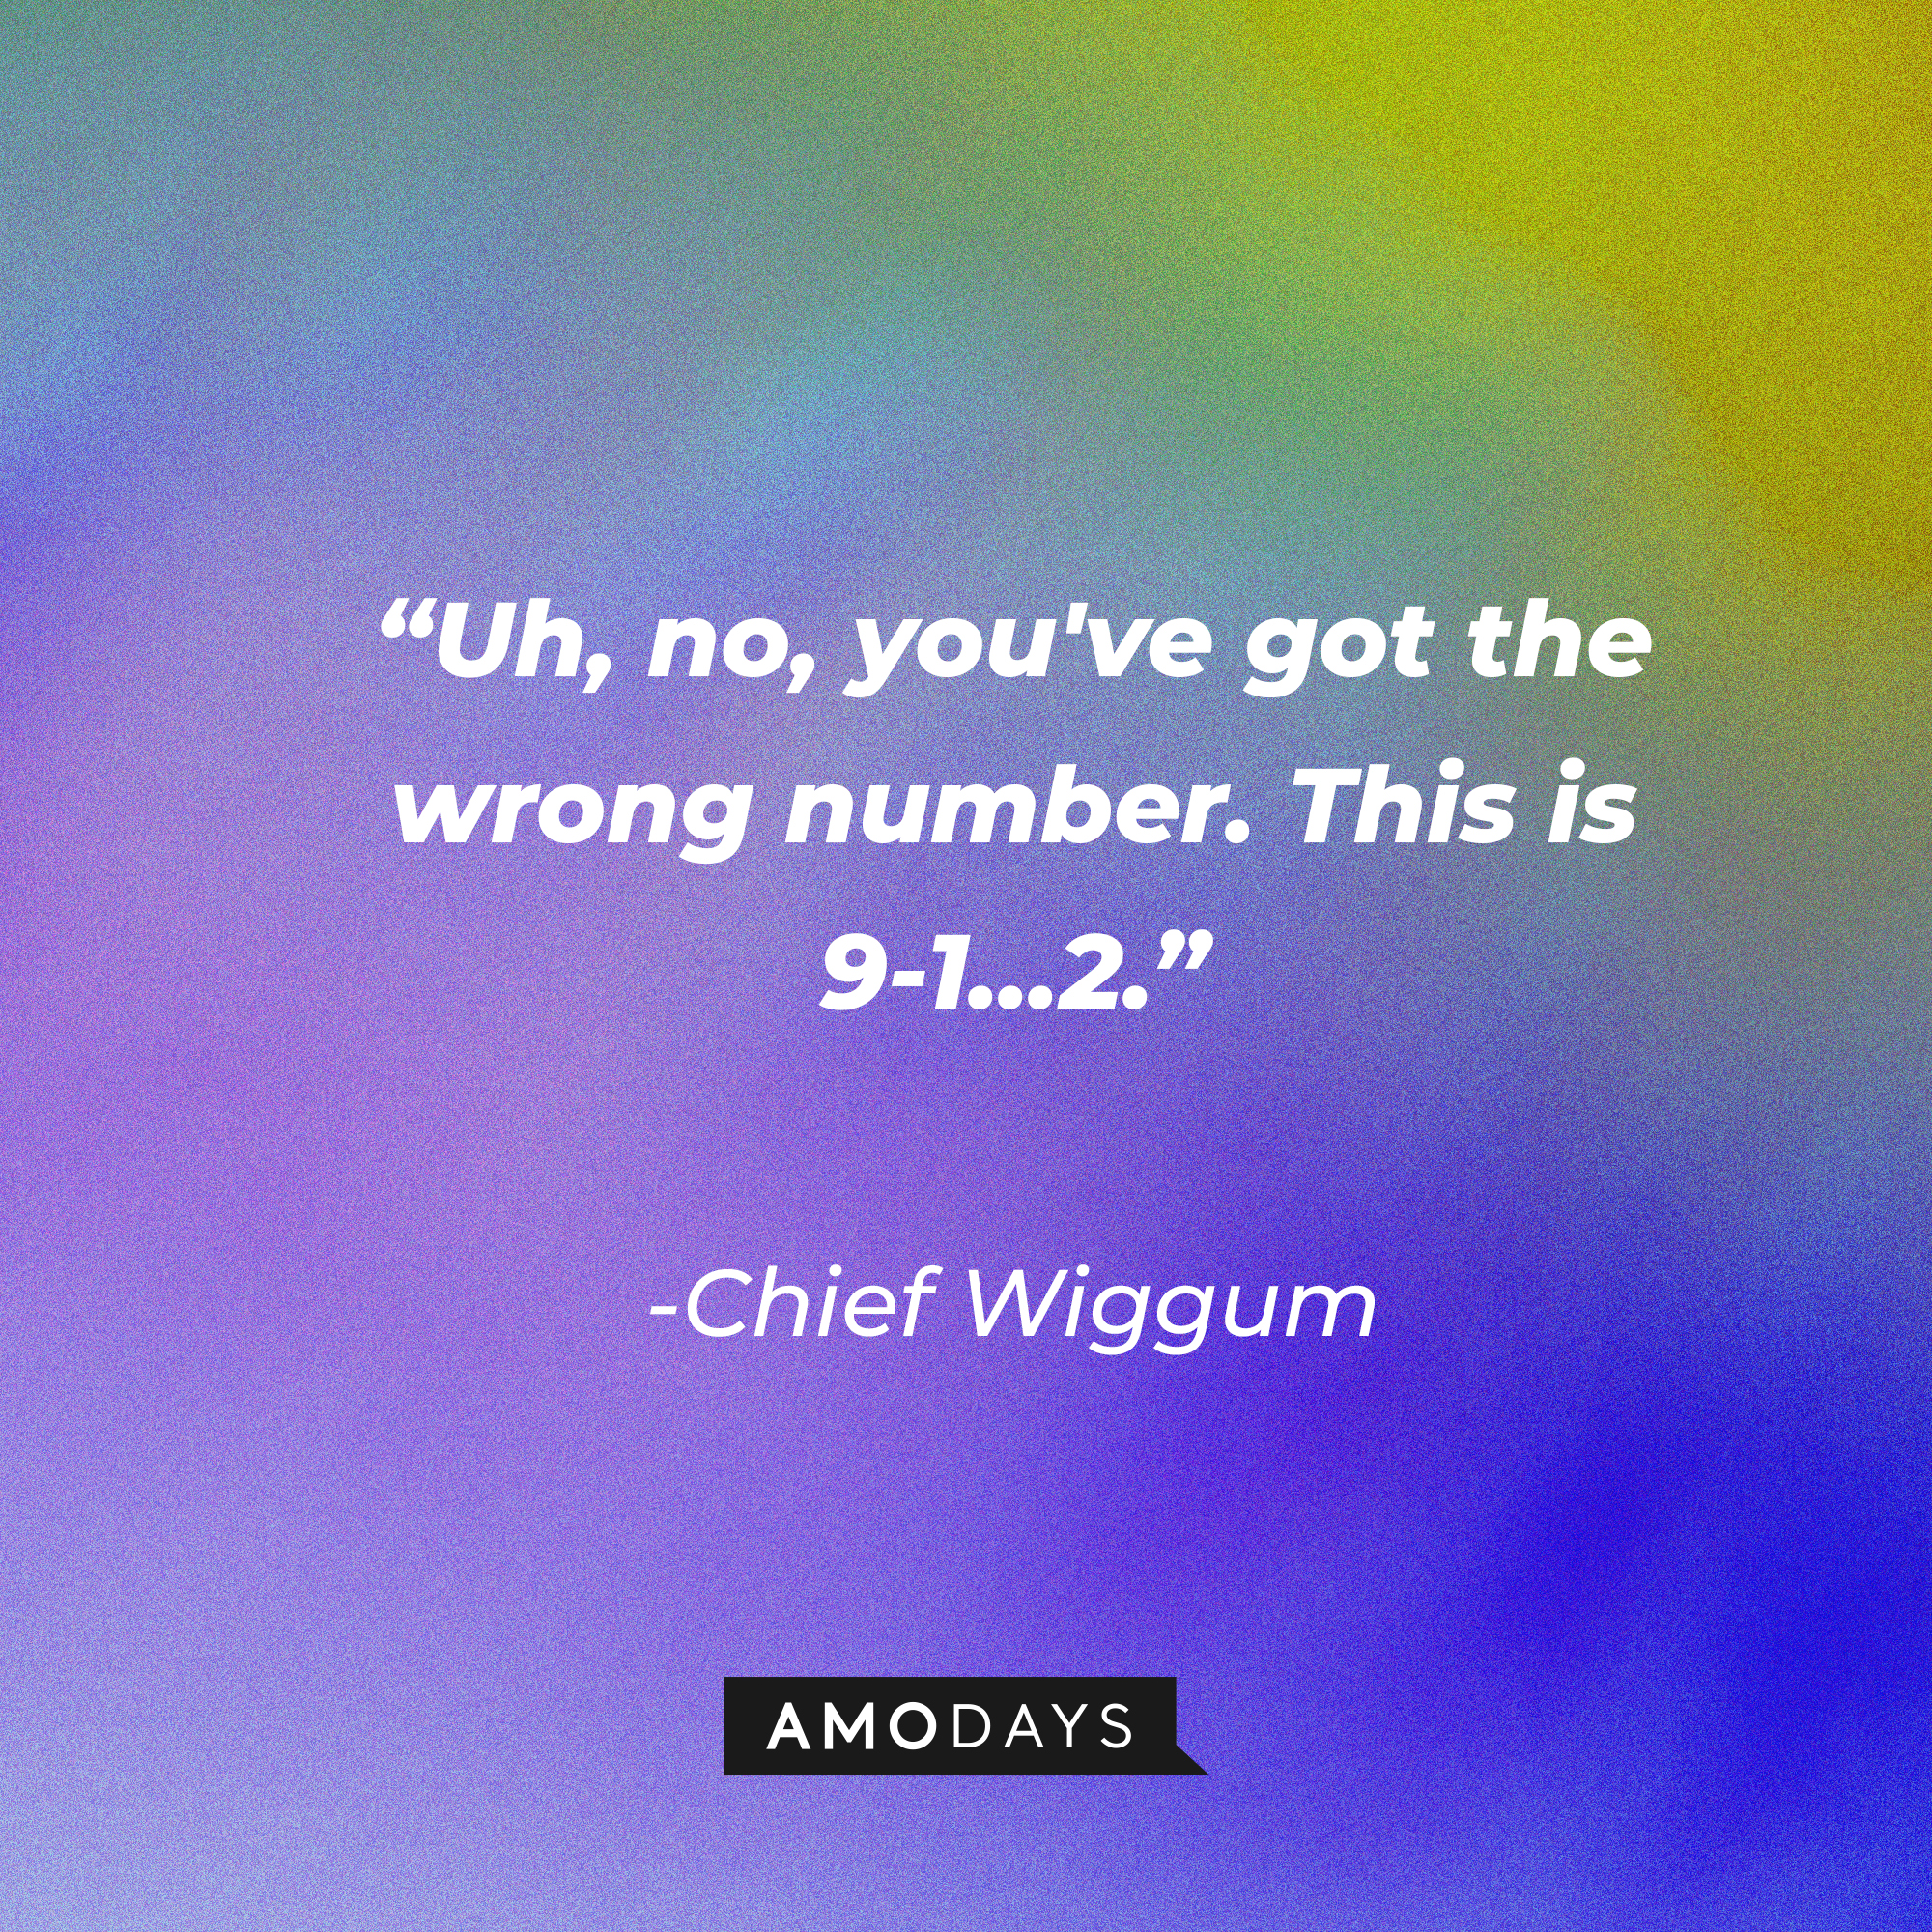 Chief Wiggum’s quote: “If anything goes wrong, just dial 911. Unless it's an emergency.” | Source: AmoDays